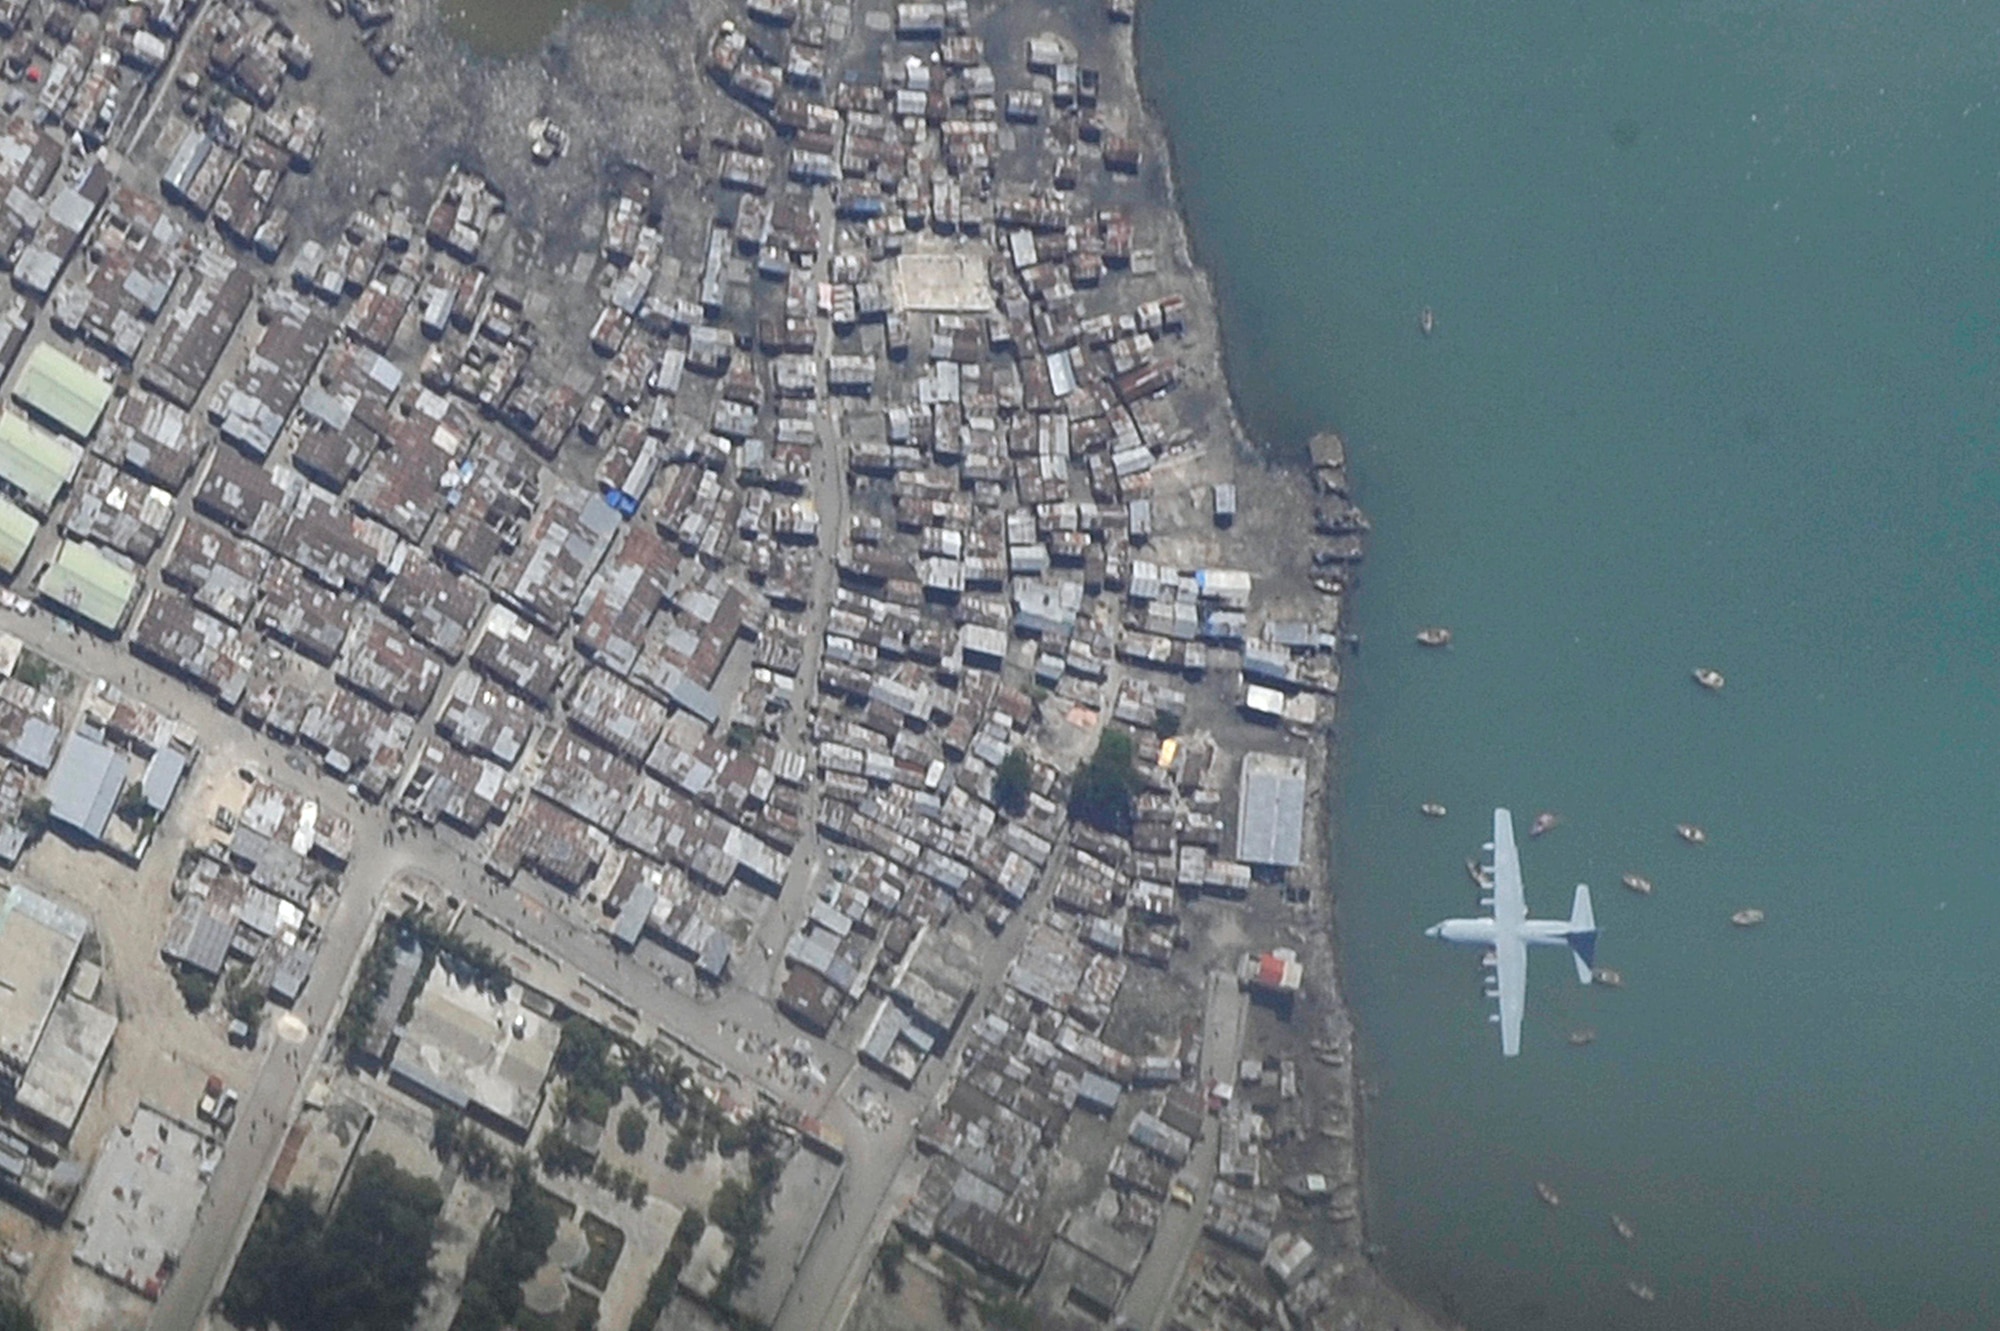 A C-130 Hercules aircraft makes a final approach into Toussaint Louverture International Airport in Port-au-Prince, Haiti, Jan. 16, 2010, part of the relief effort that delivered critical medical personnel and supplies after the area was hit by a 7.0 earthquake. (U.S. Air Force photo by Airman 1st Class Perry Aston)